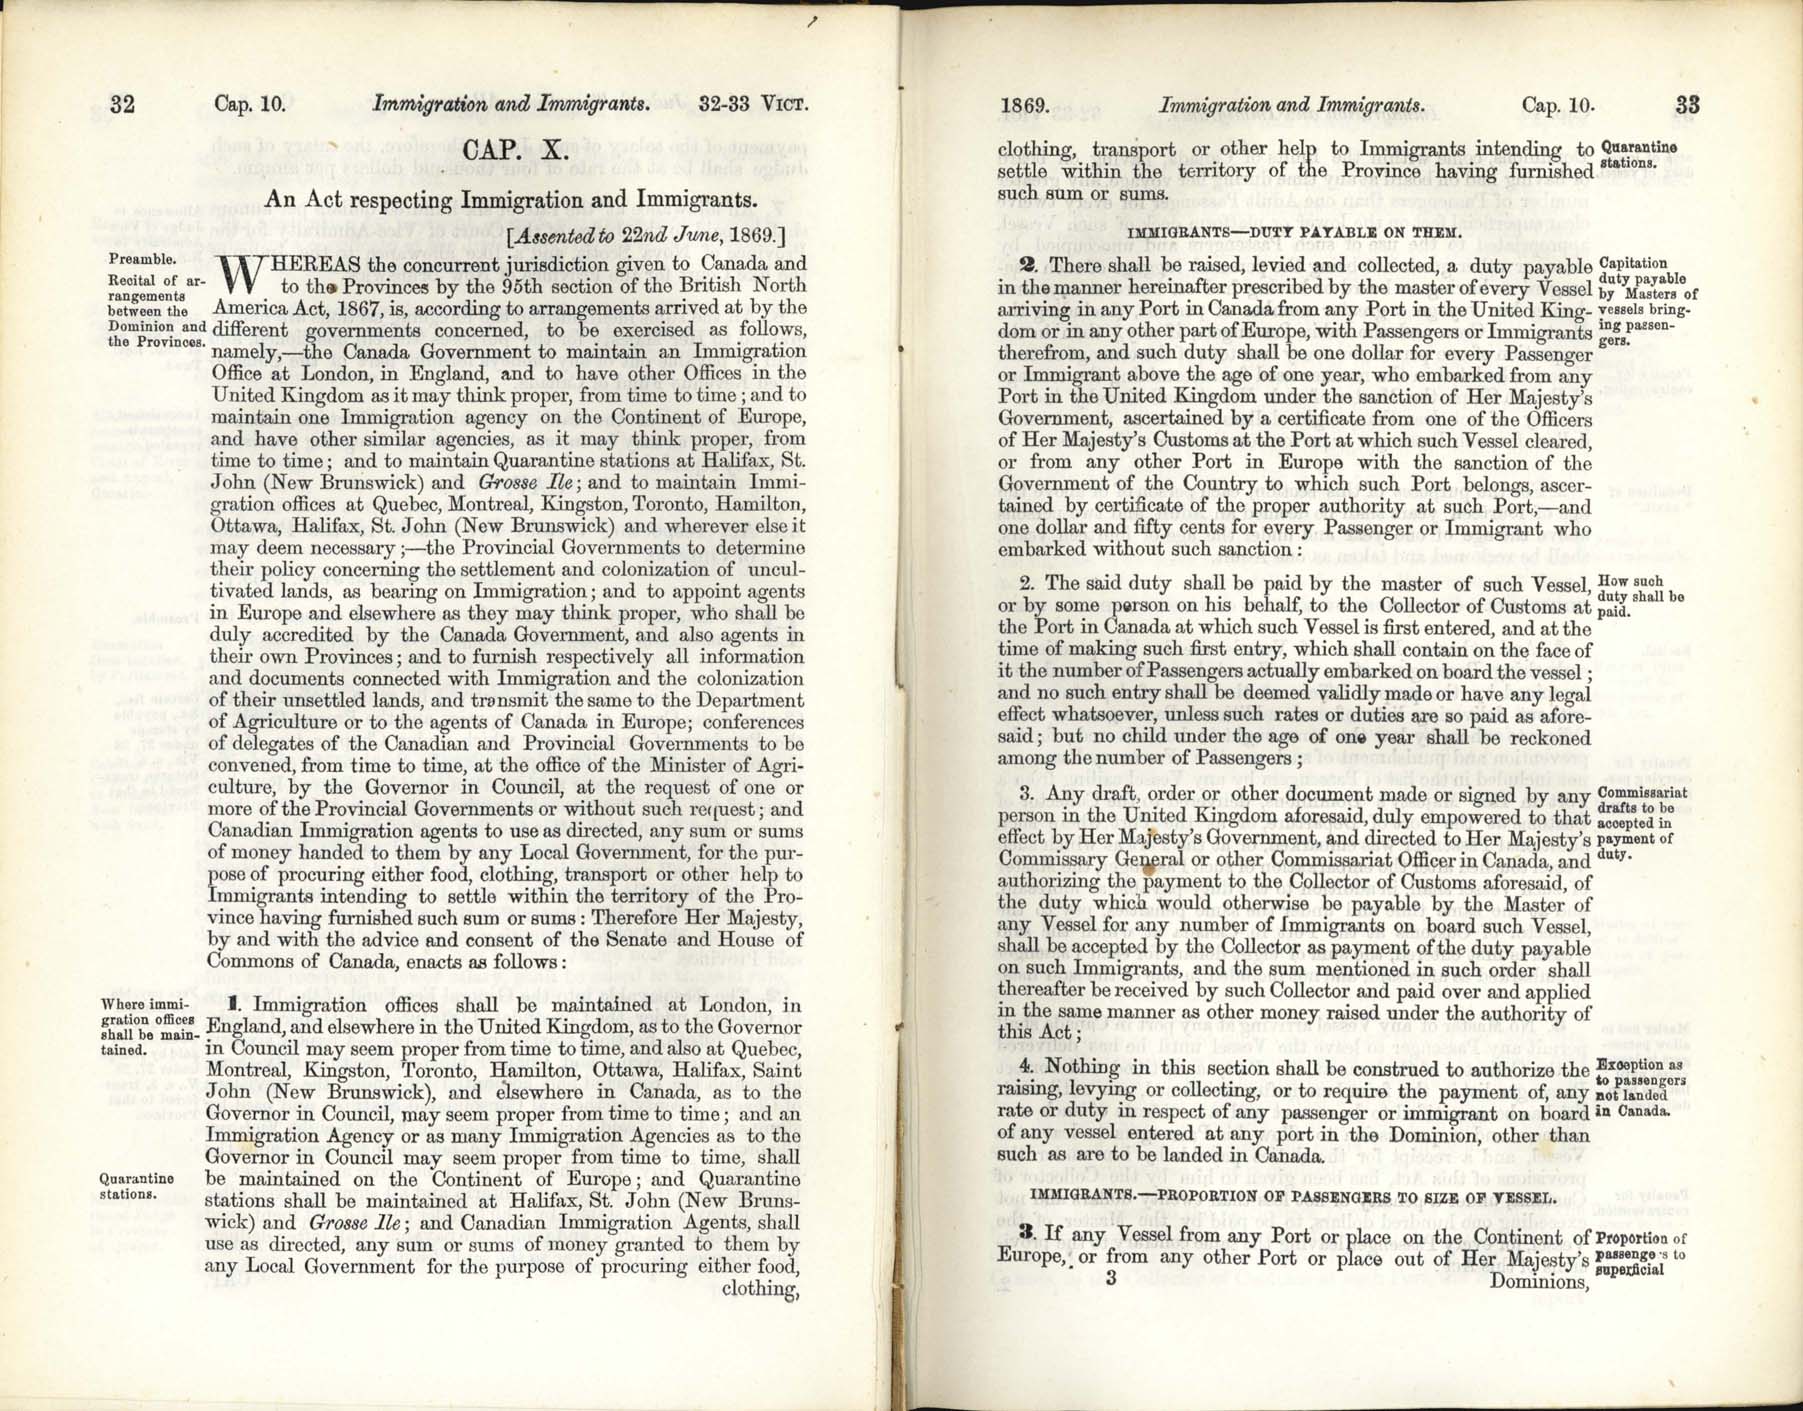 Page 32, 33 Immigration Act, 1869